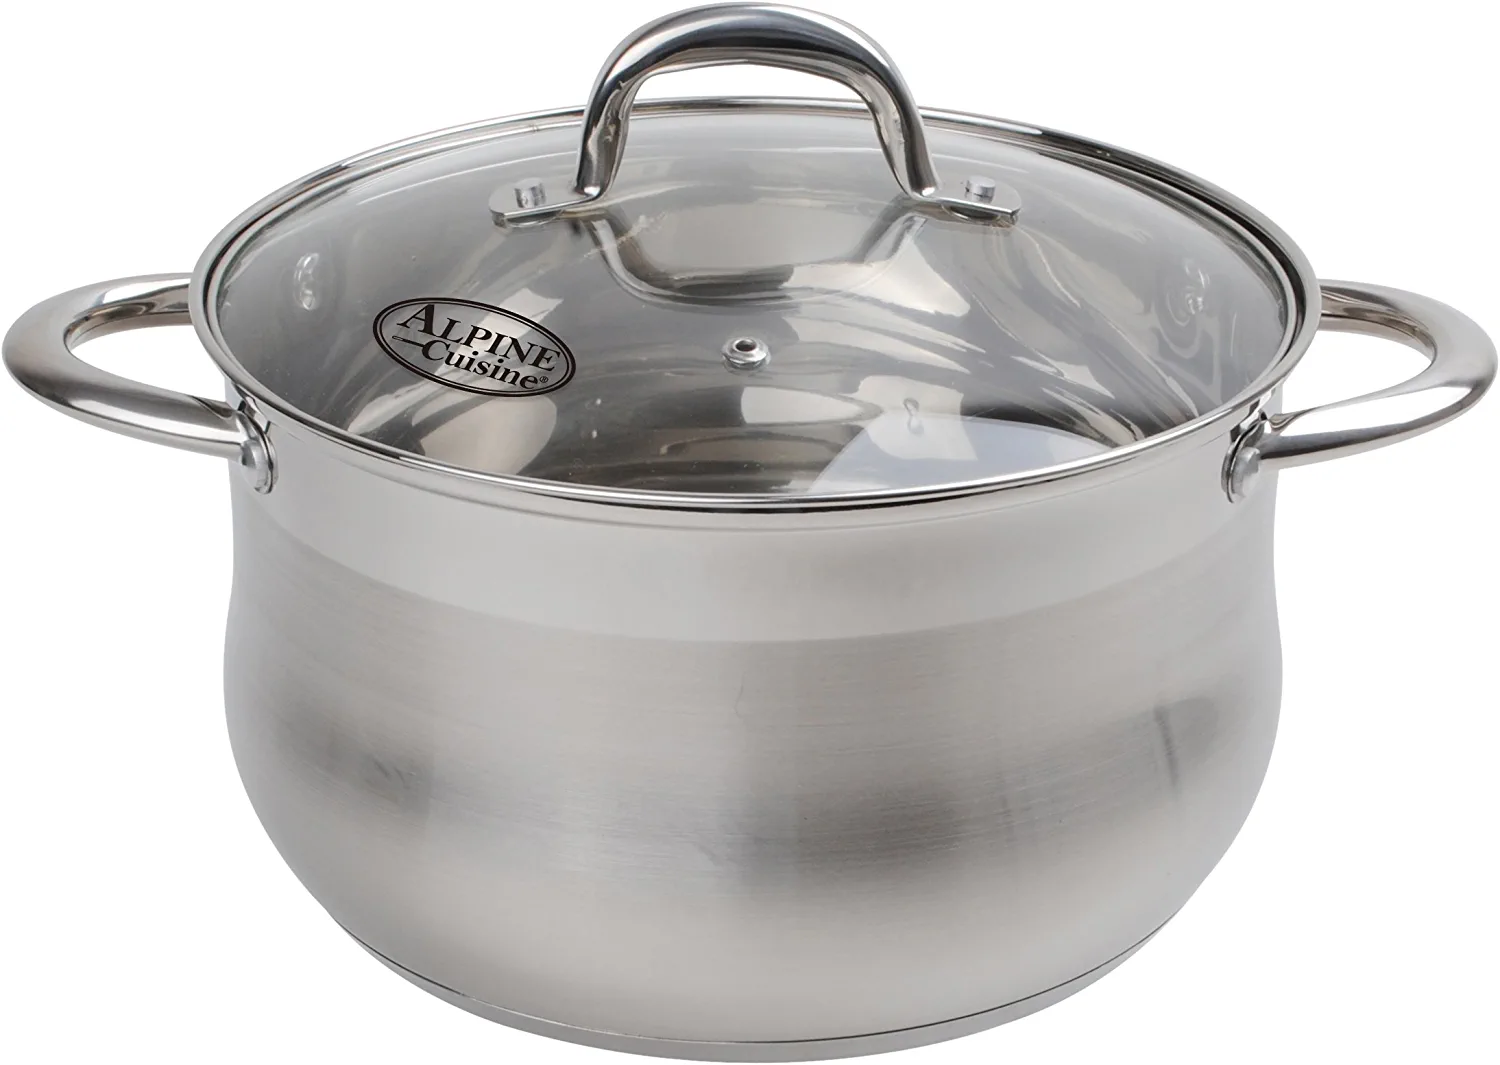 Alpine Cuisine Sauce Pan Stainless steel 3Qt Belly Shape with